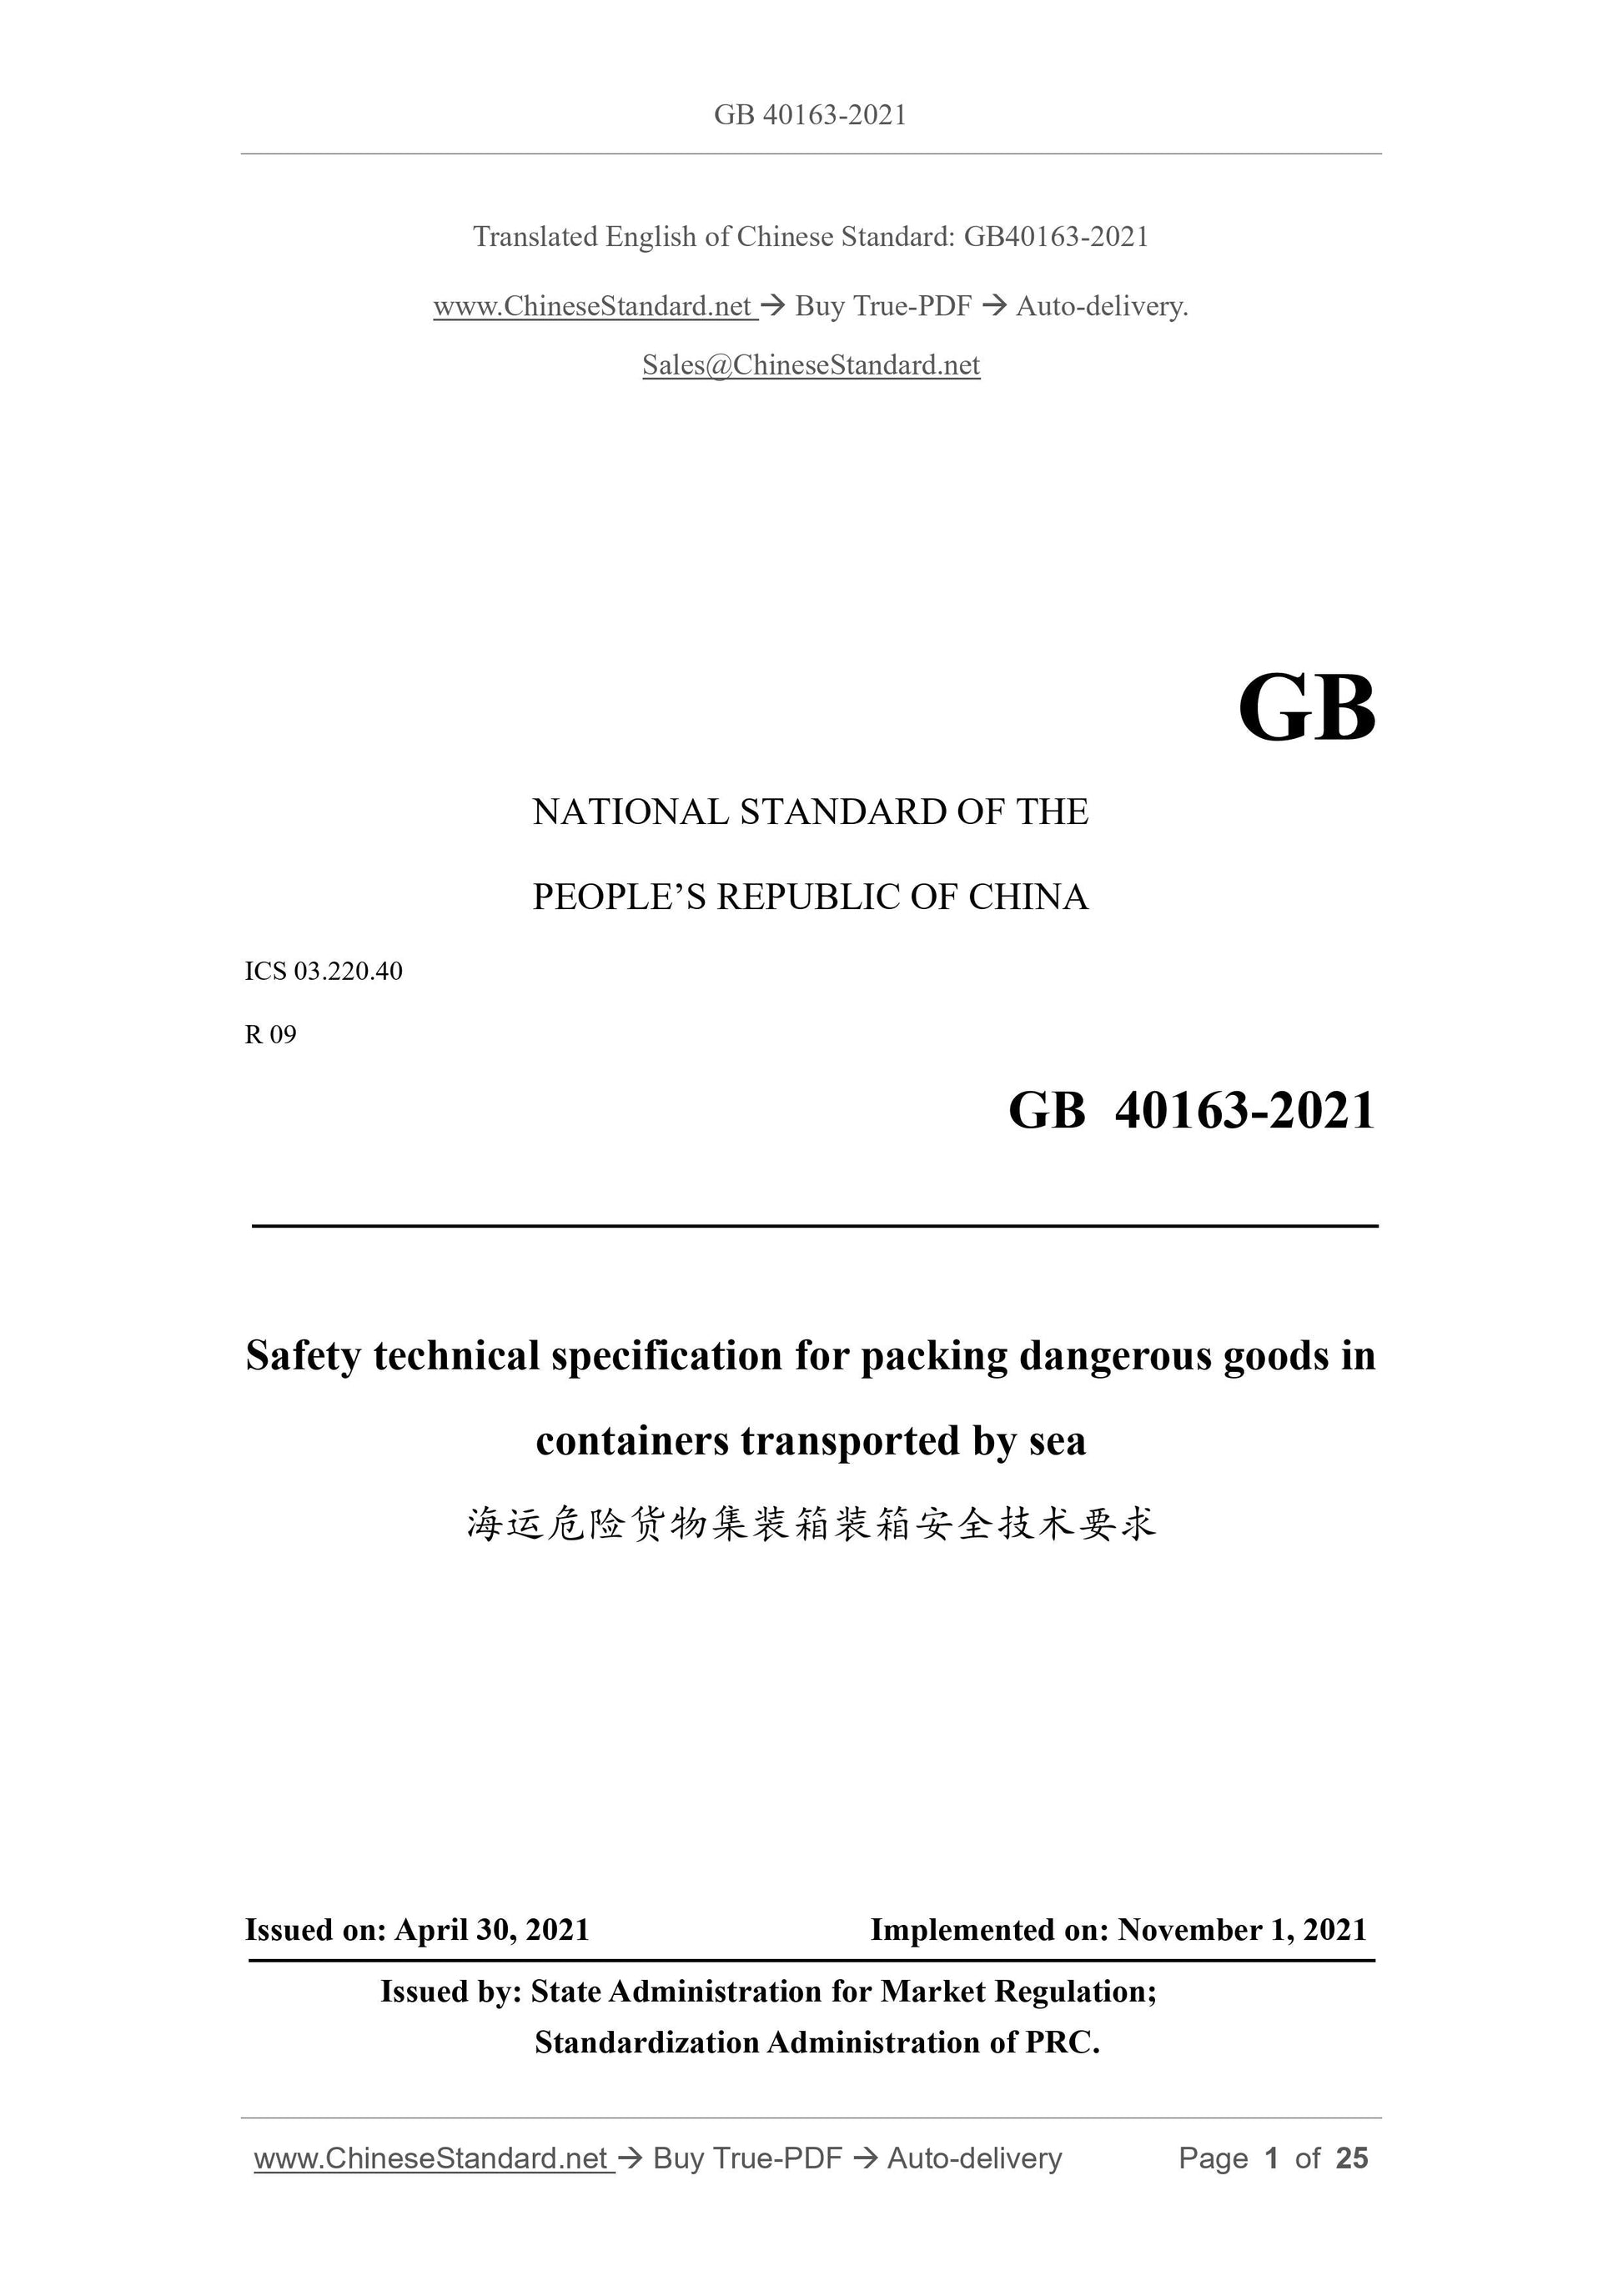 GB 40163-2021 Page 1